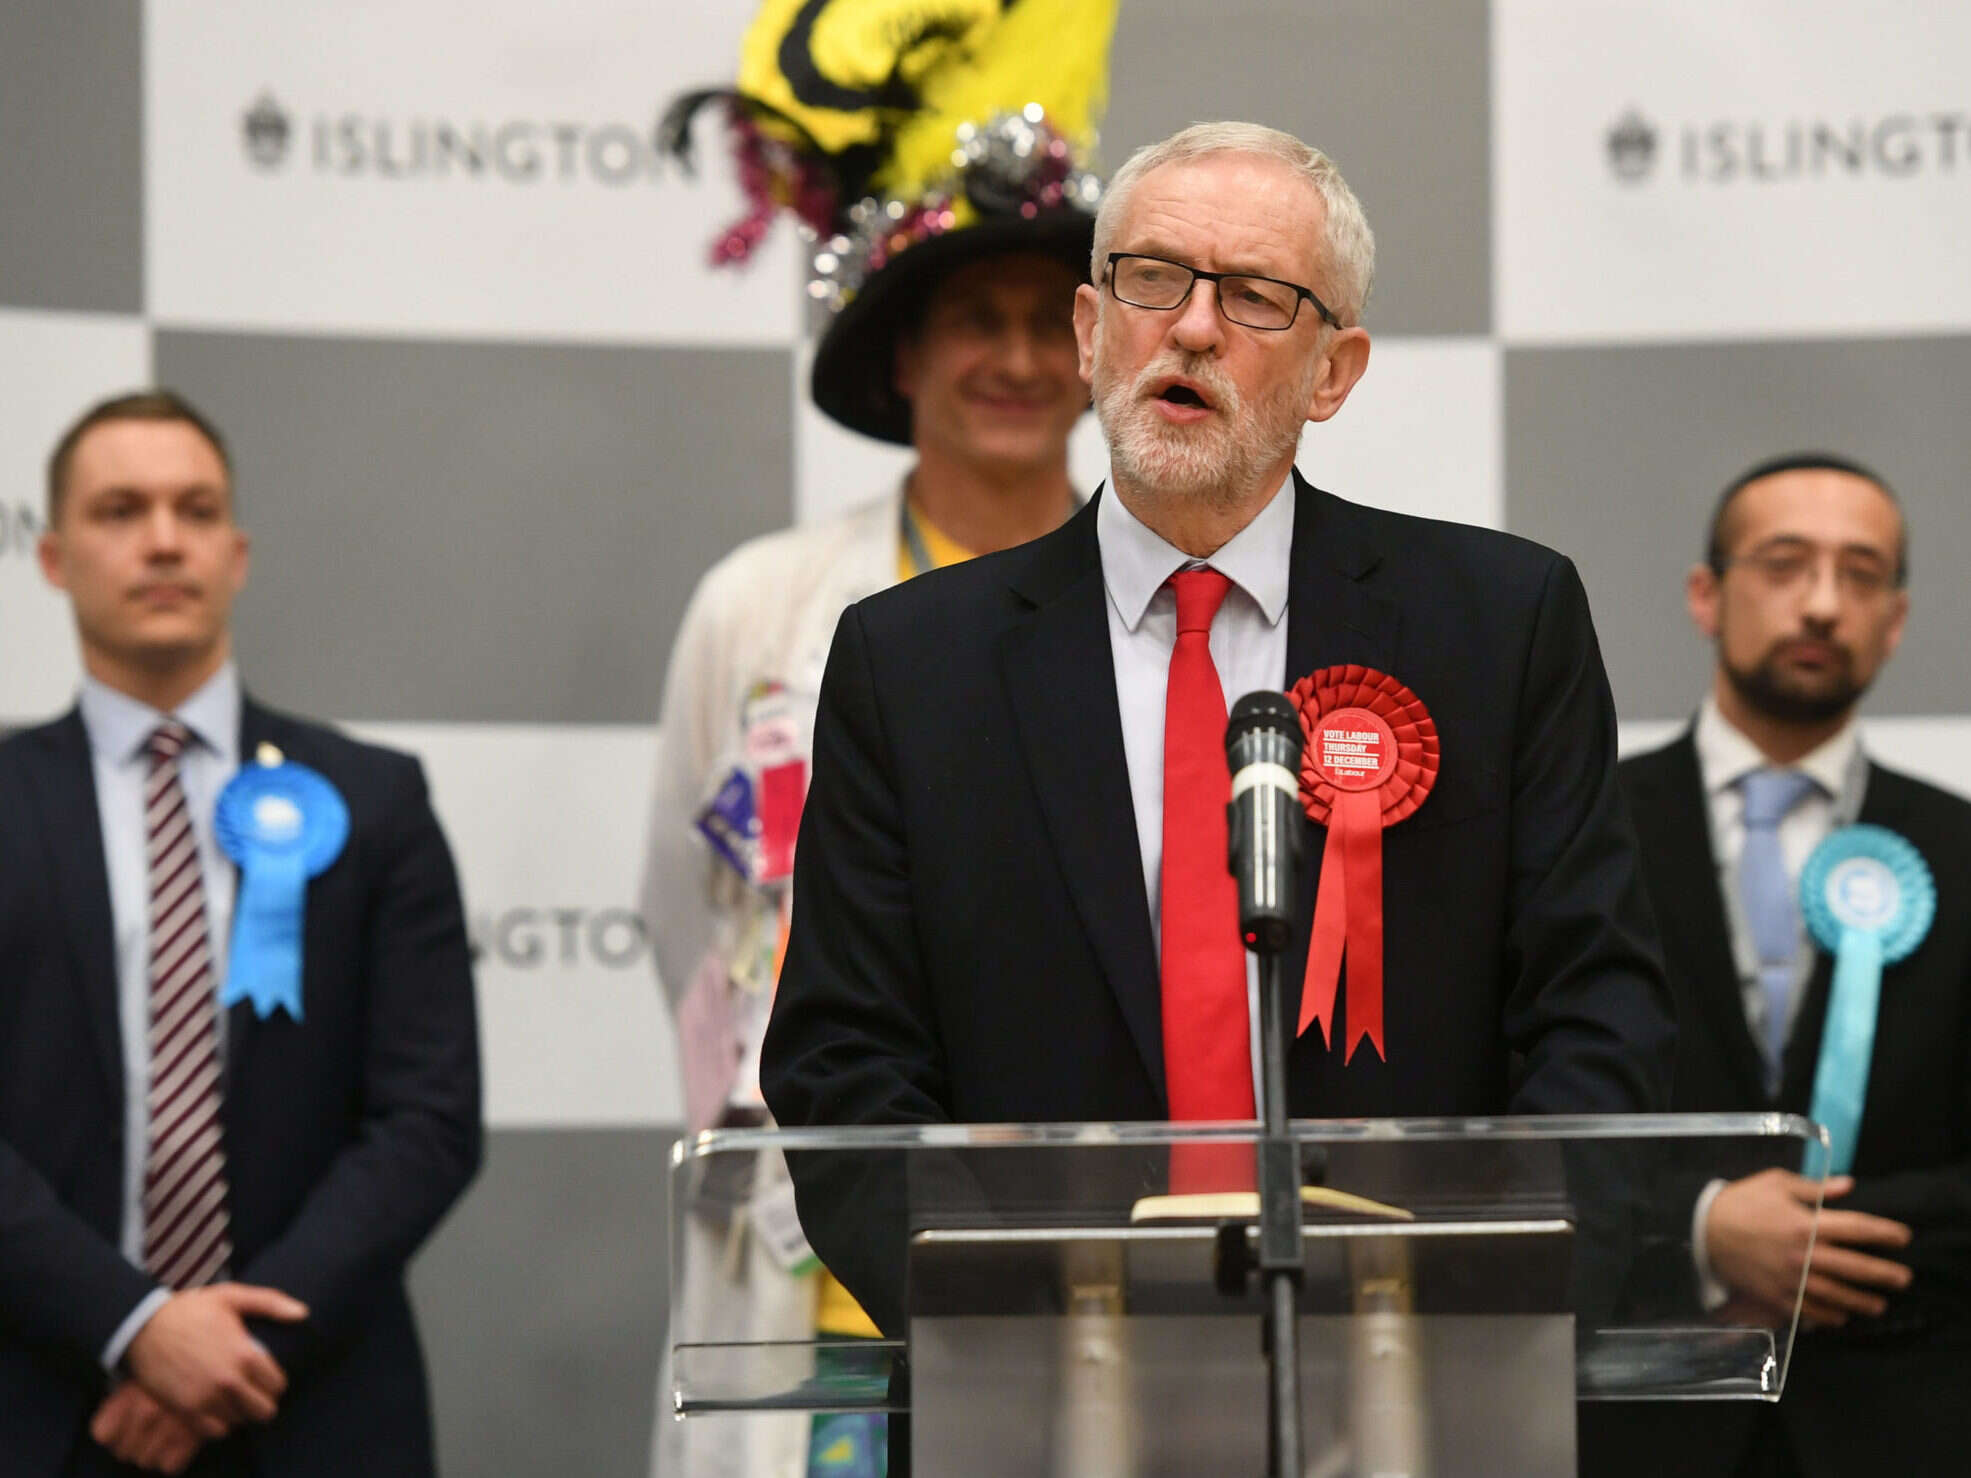 Labour blames press for 'echoing' Tory message on Brexit after huge election defeat